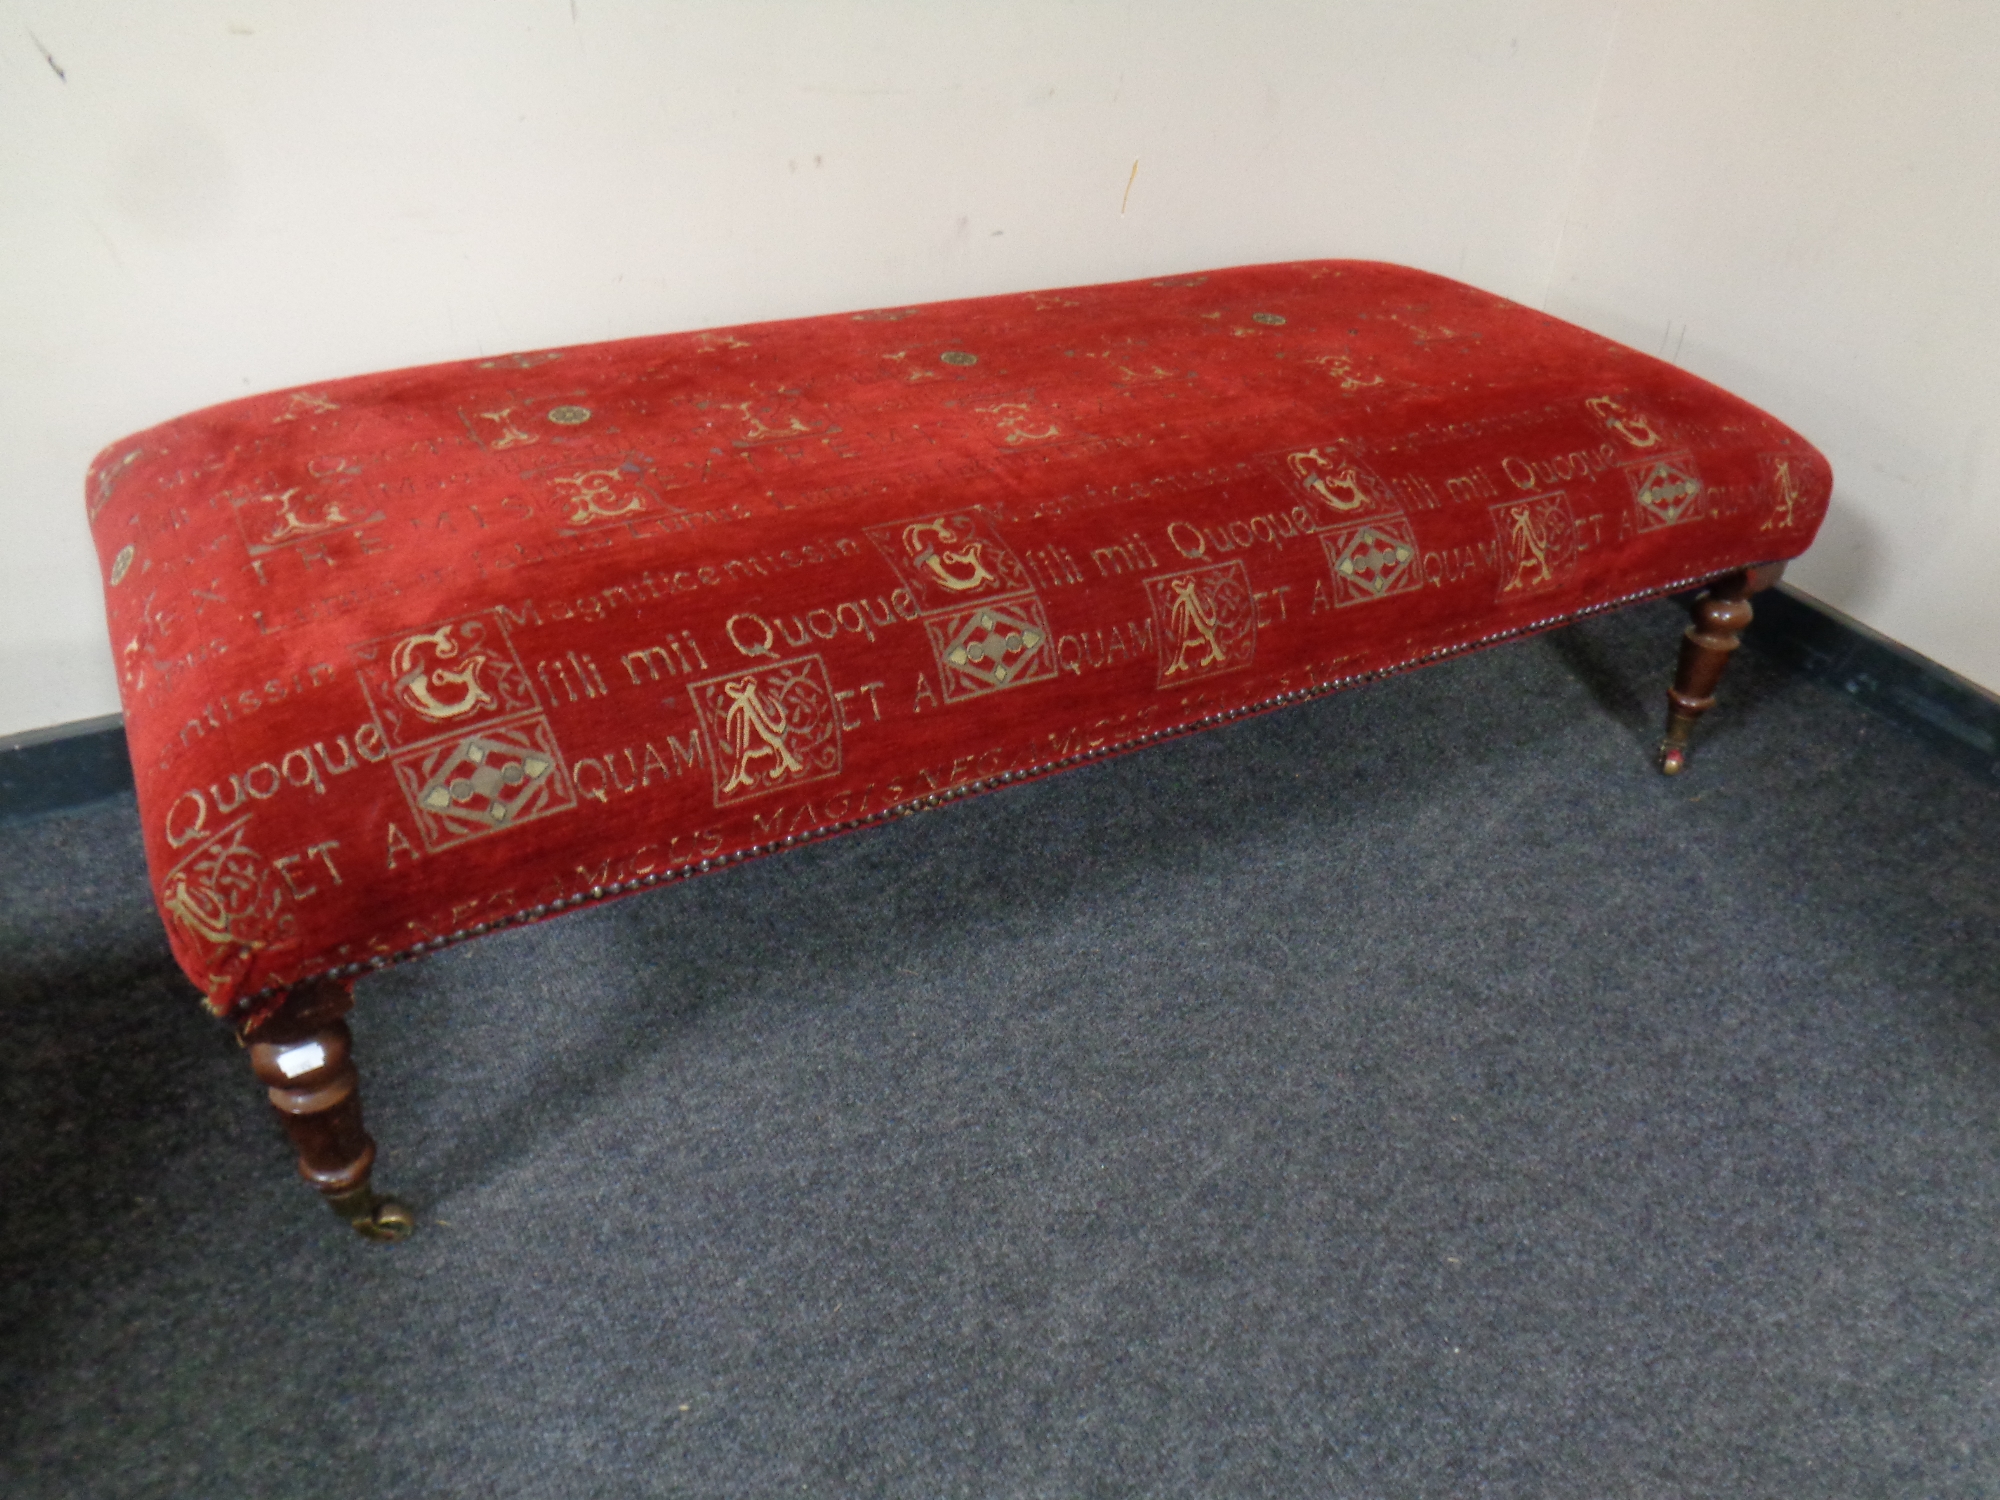 A contemporary oversized footstool upholstered in a red fabric